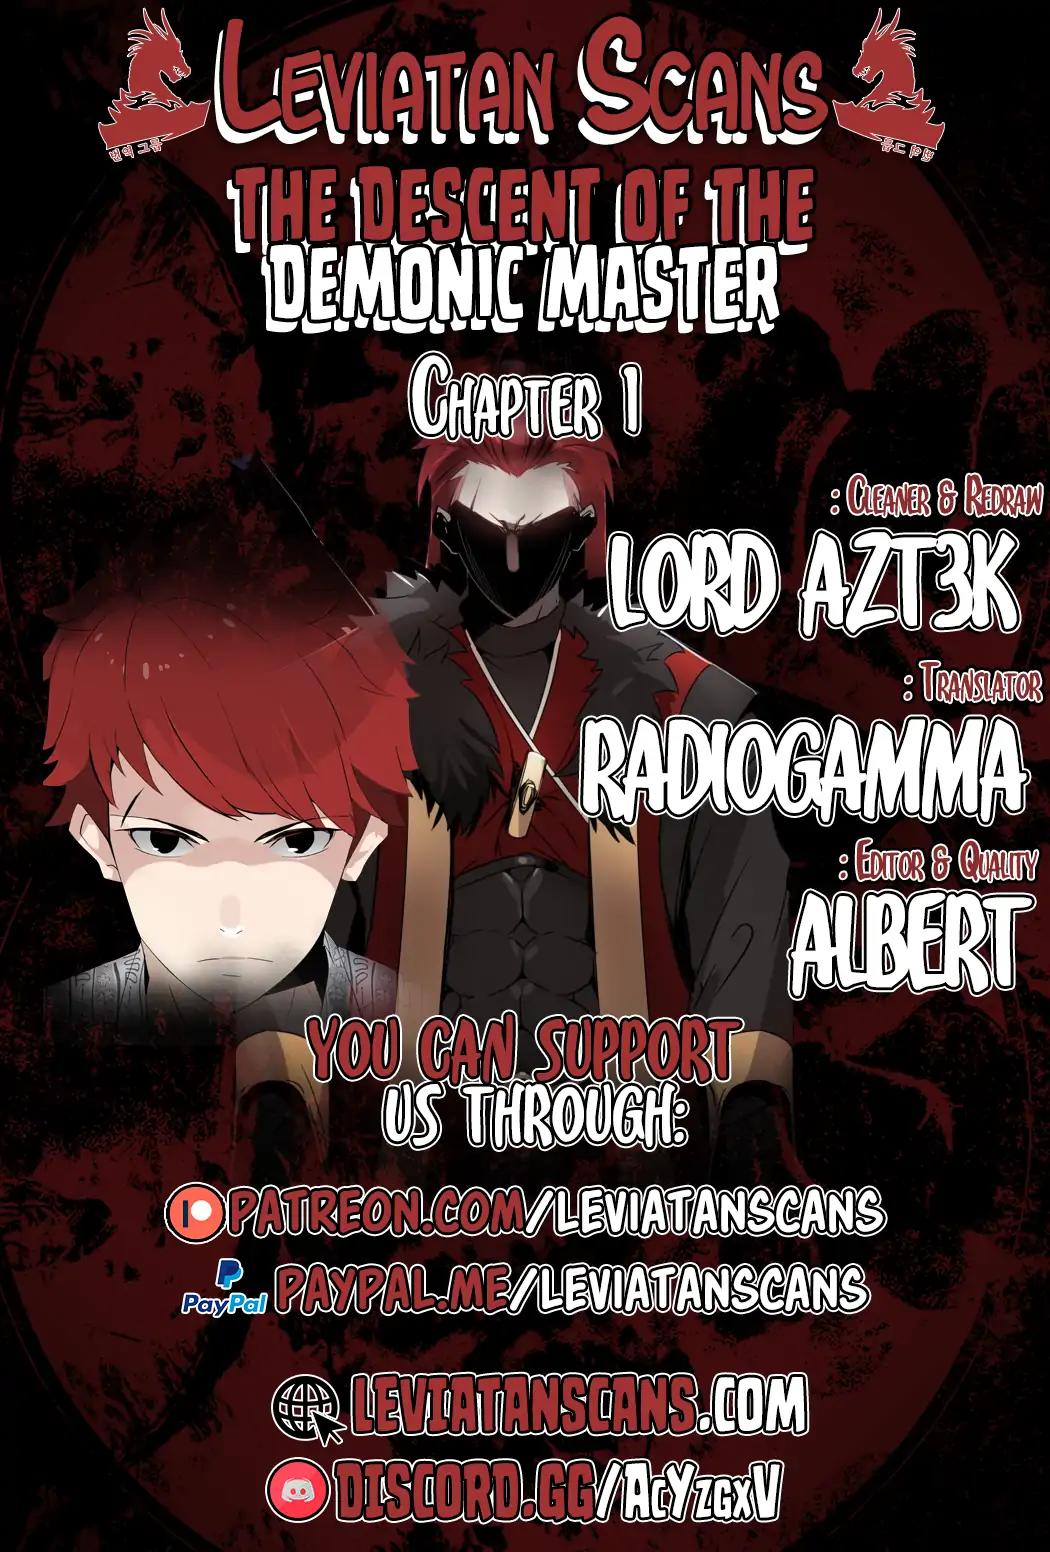 The Descent of the Demonic Master Chapter 1